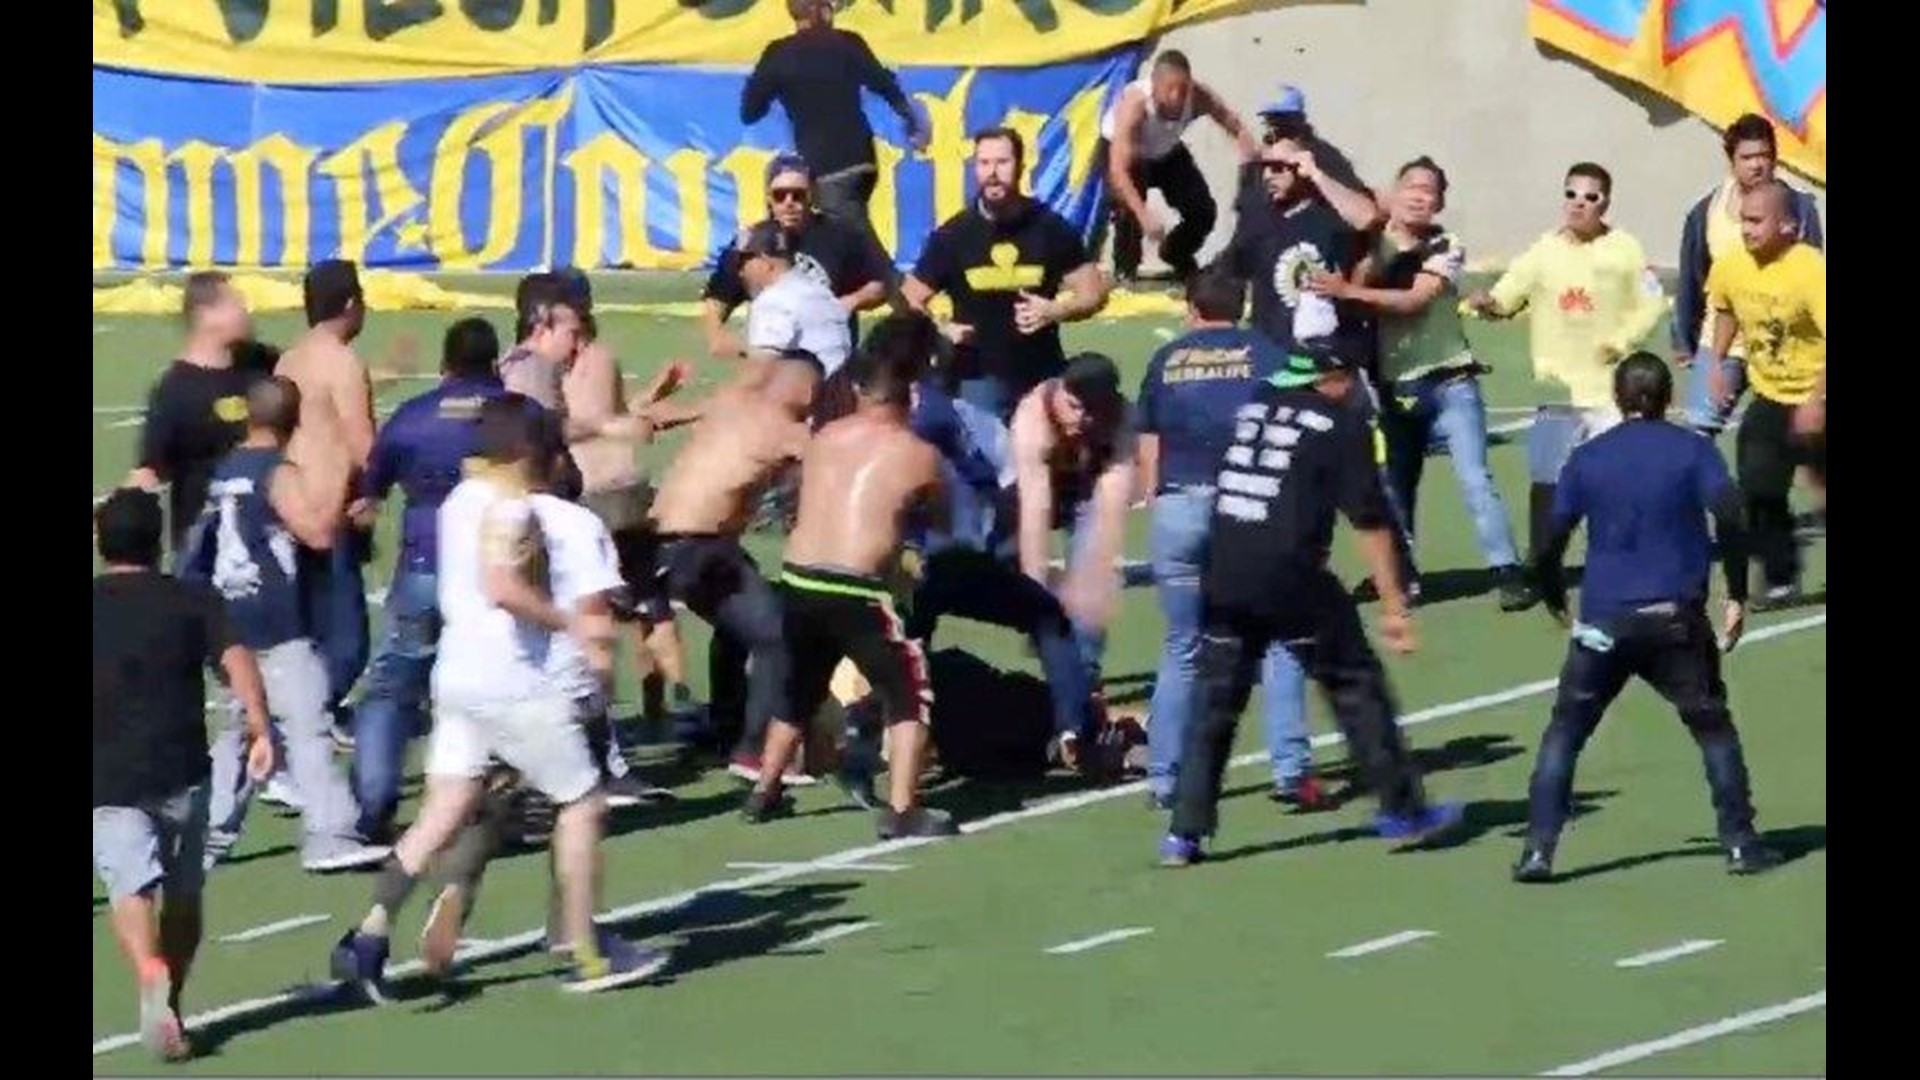 Soccer game turns violent as fans of Mexican teams brawl - cbs8.com